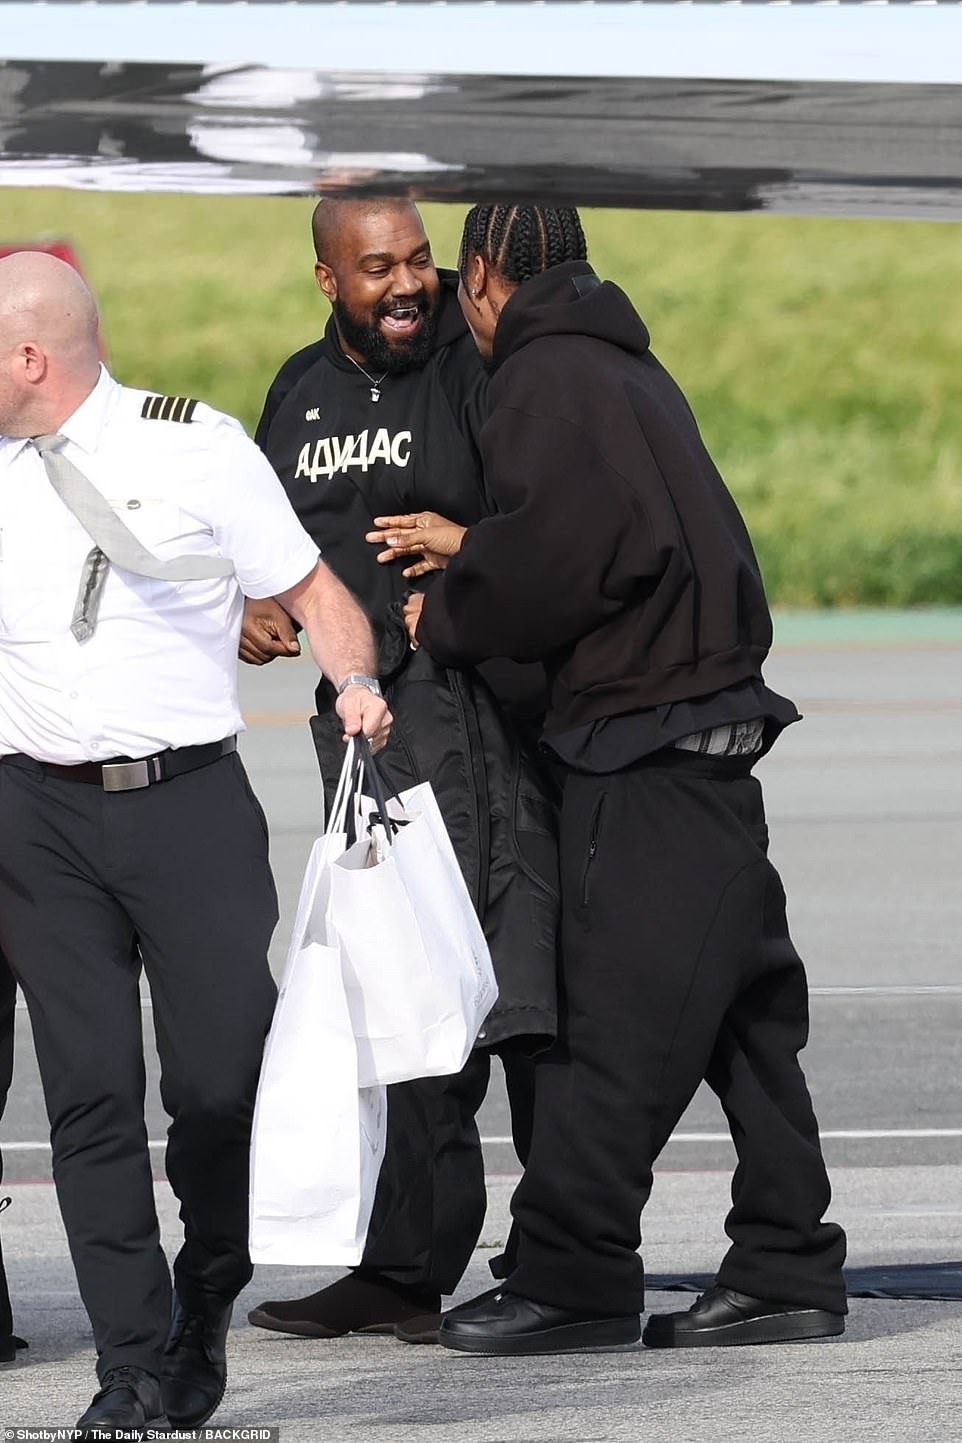 Kanye burst out laughing with a pal on the tarmac and appeared to be in a jovial mood